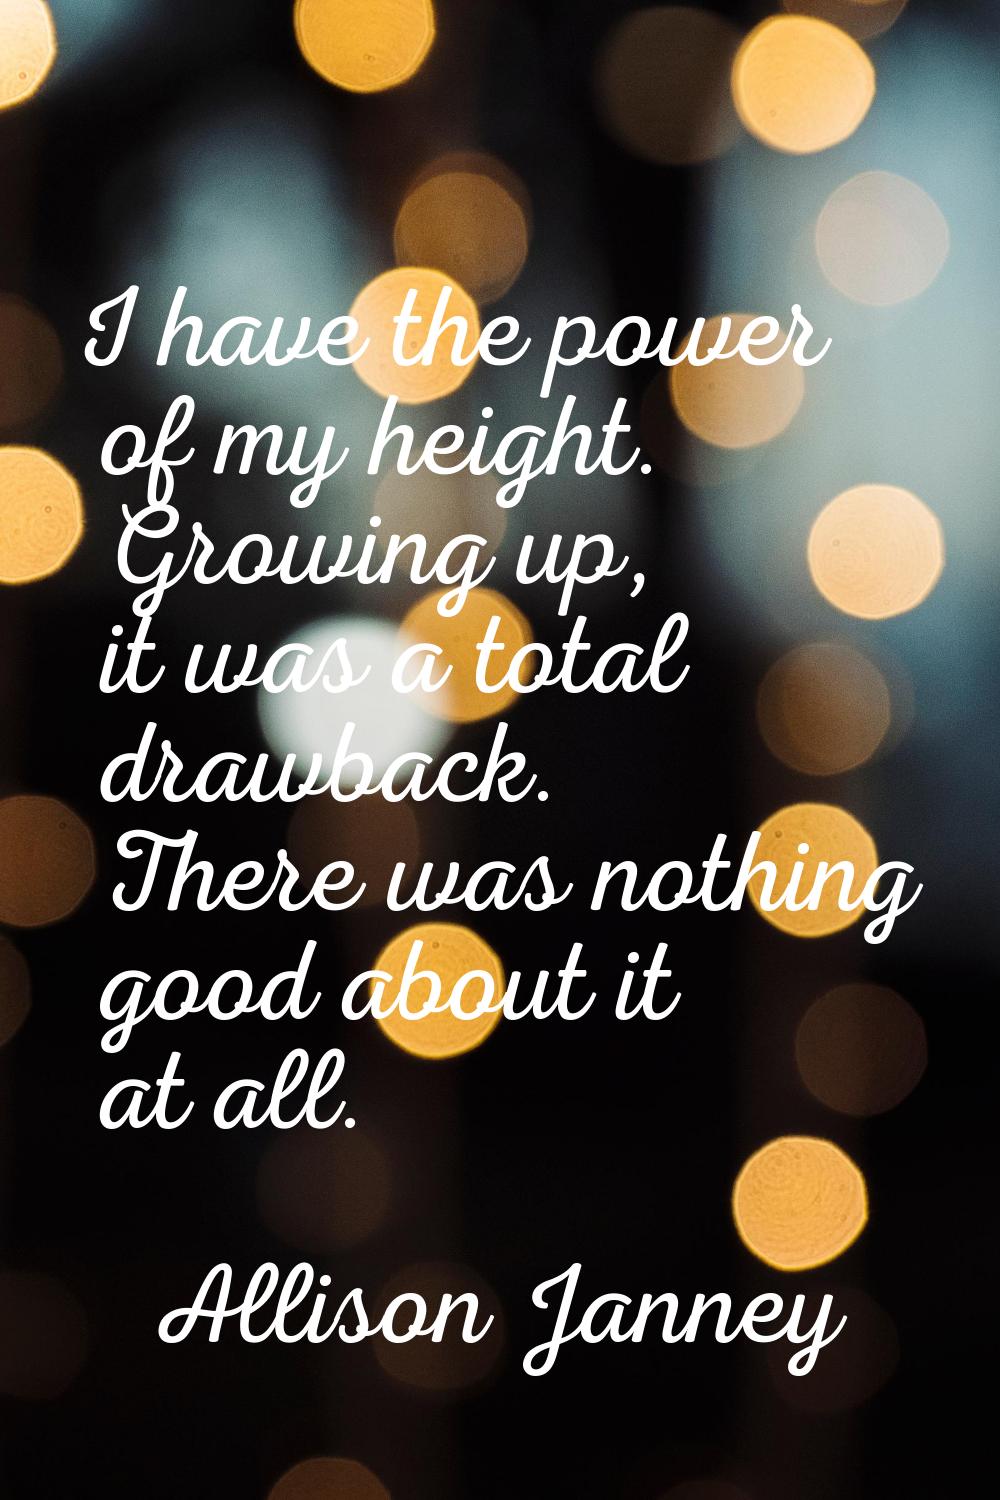 I have the power of my height. Growing up, it was a total drawback. There was nothing good about it